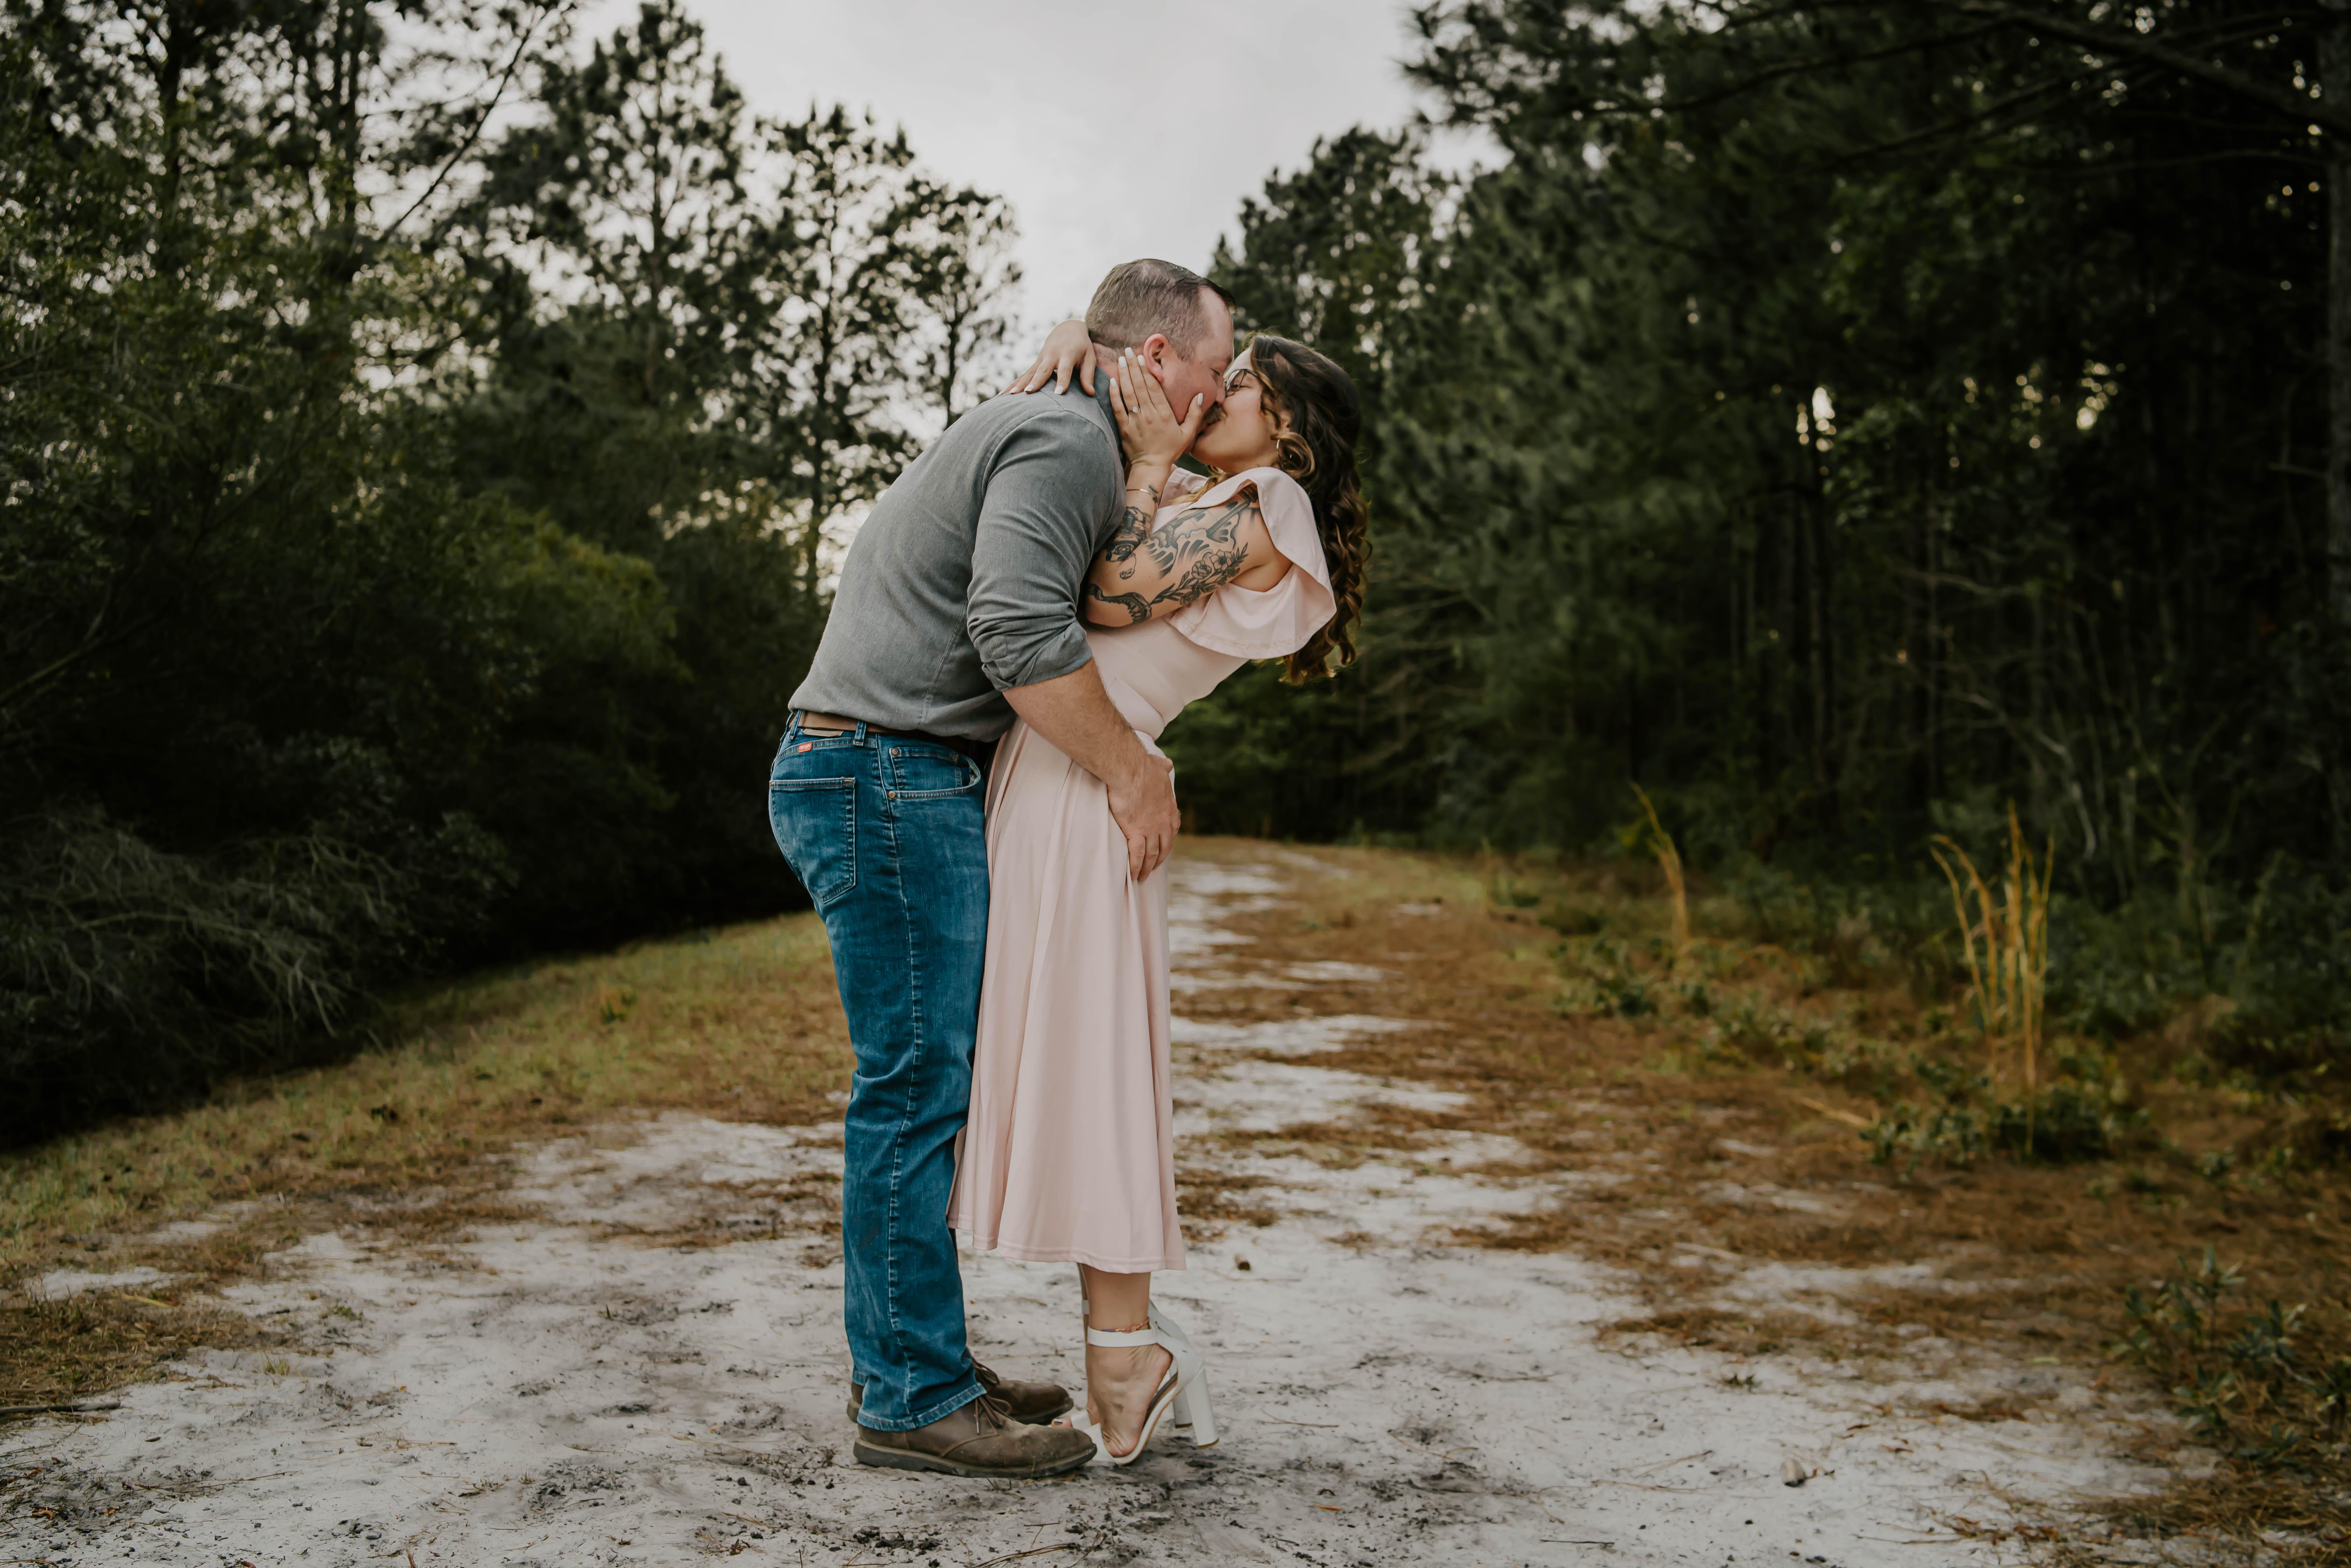 The Wedding Website of Taylor Deland and Justin Paye